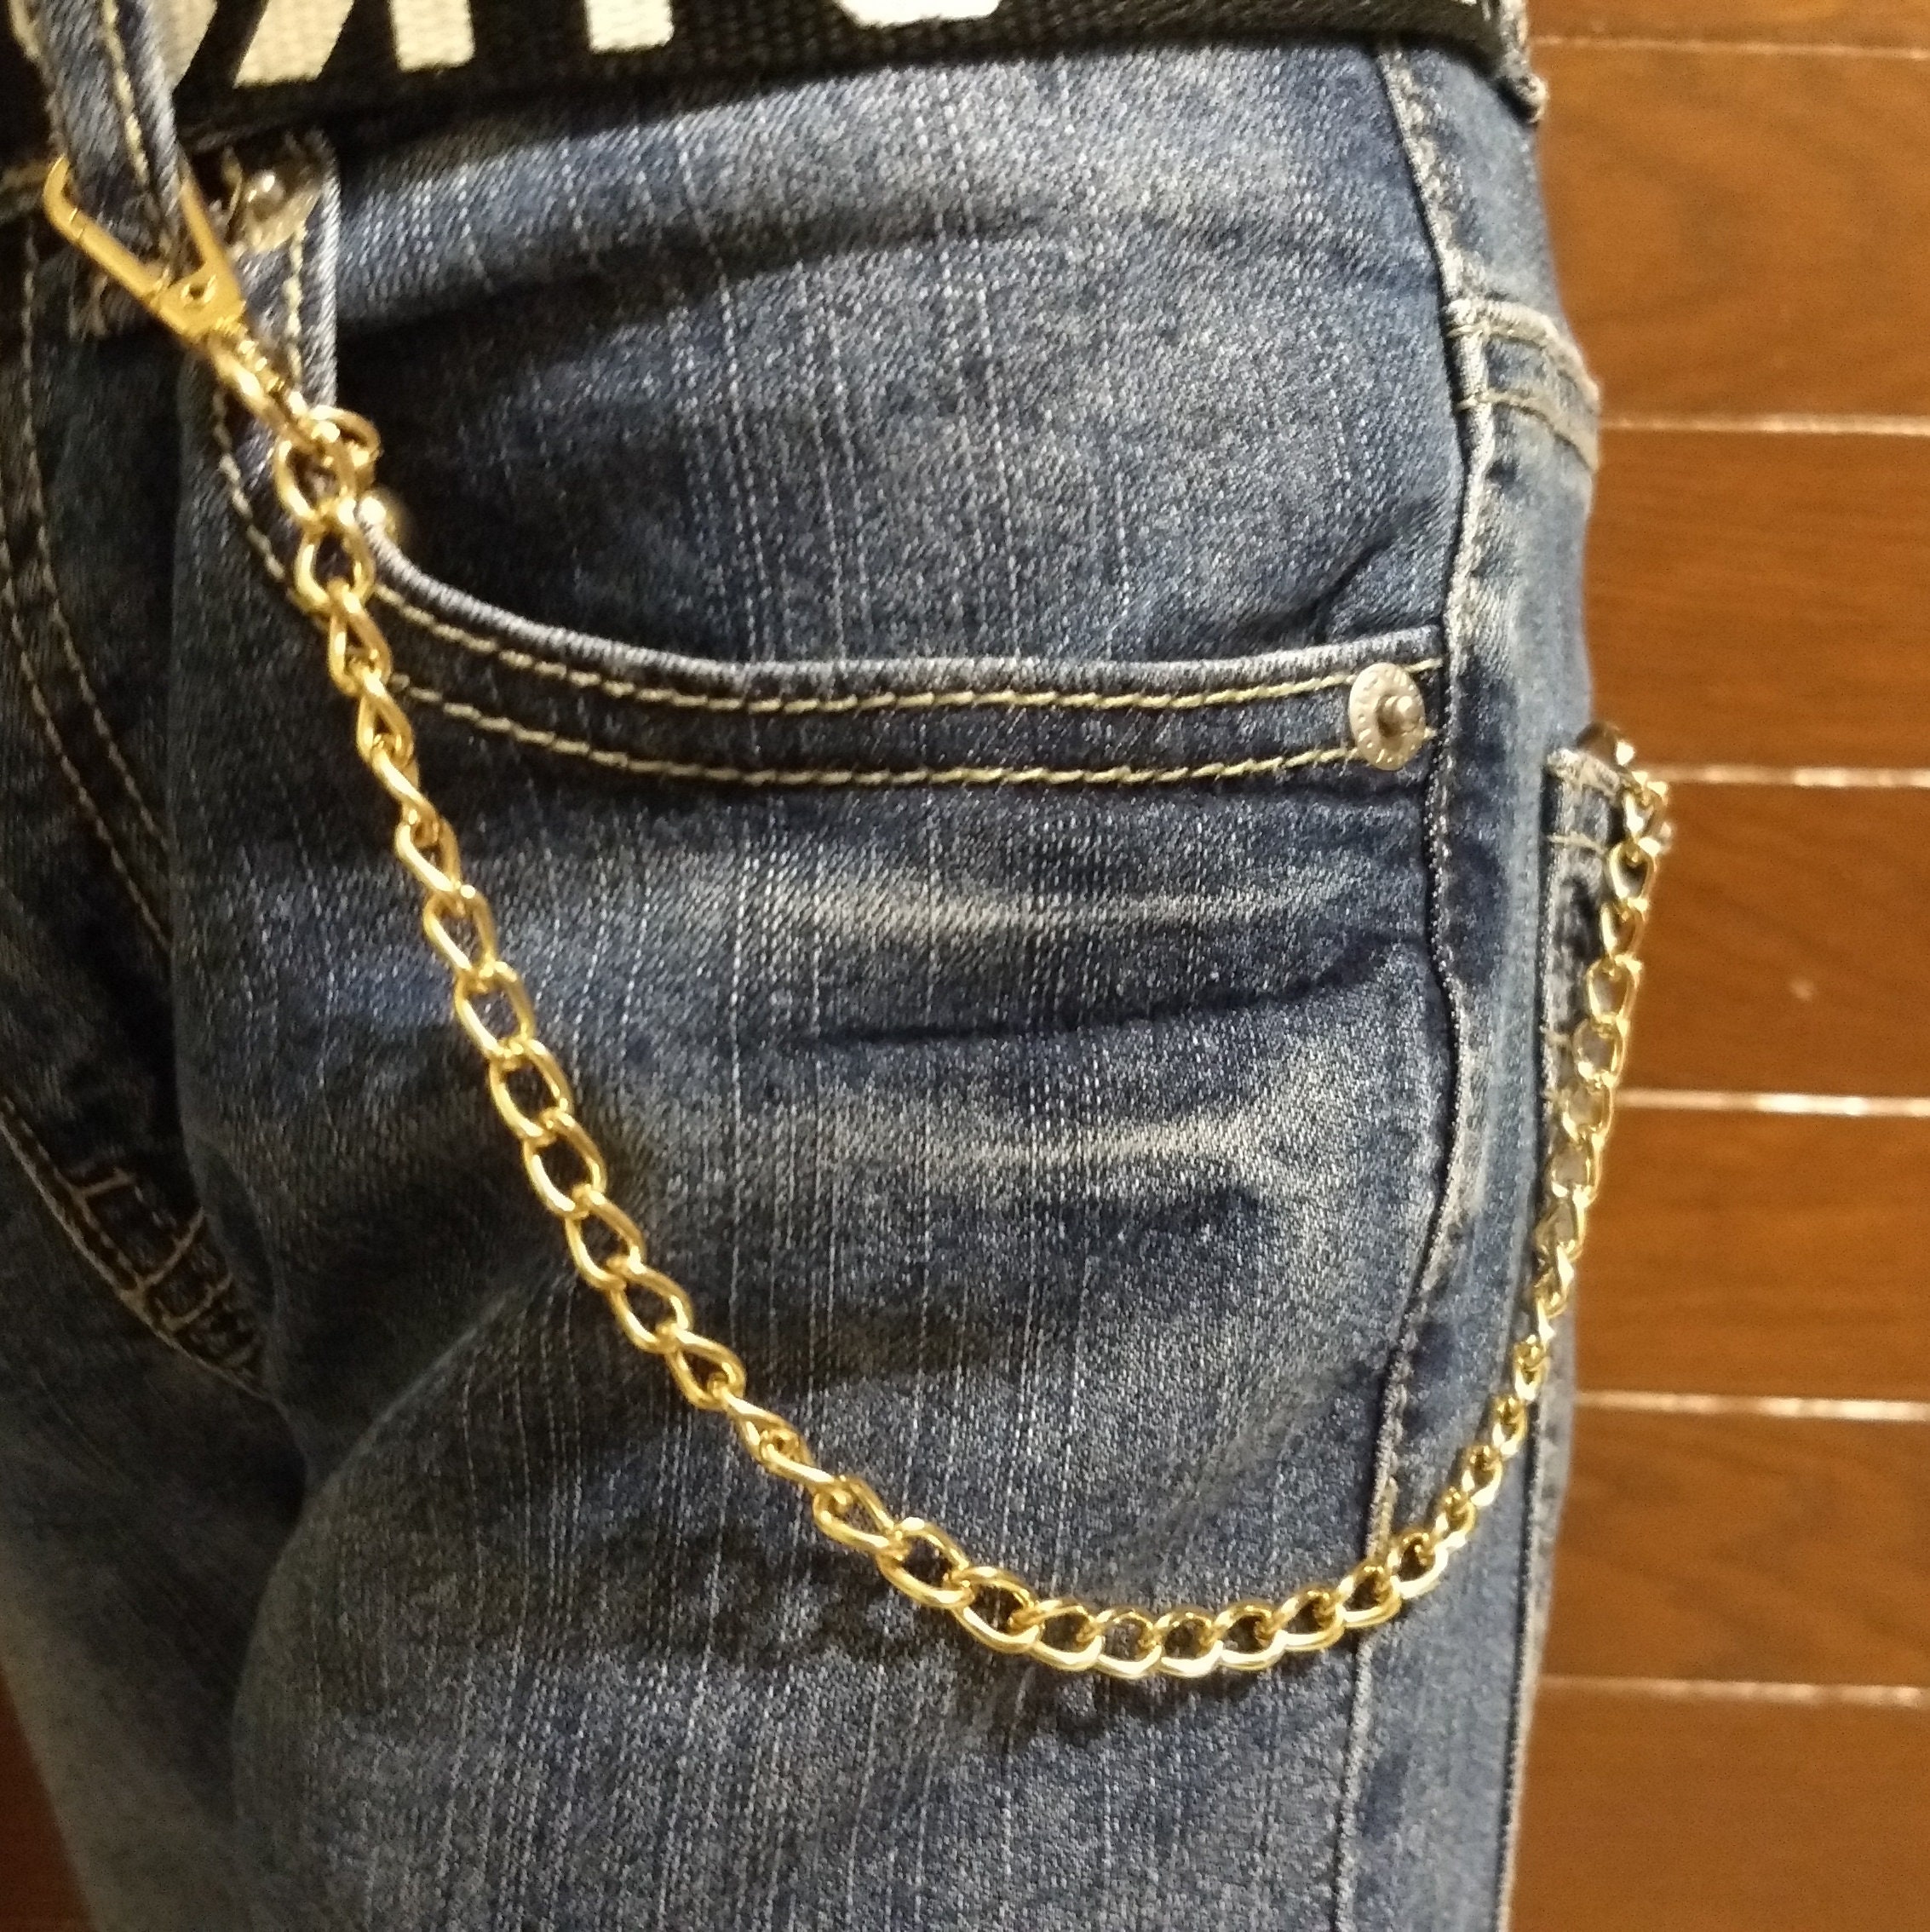 Trouser chain gold, metal steel Wallet chain for women, chain for pants,  birthday gift for girlfriend, rave babe accessory, young girl gift